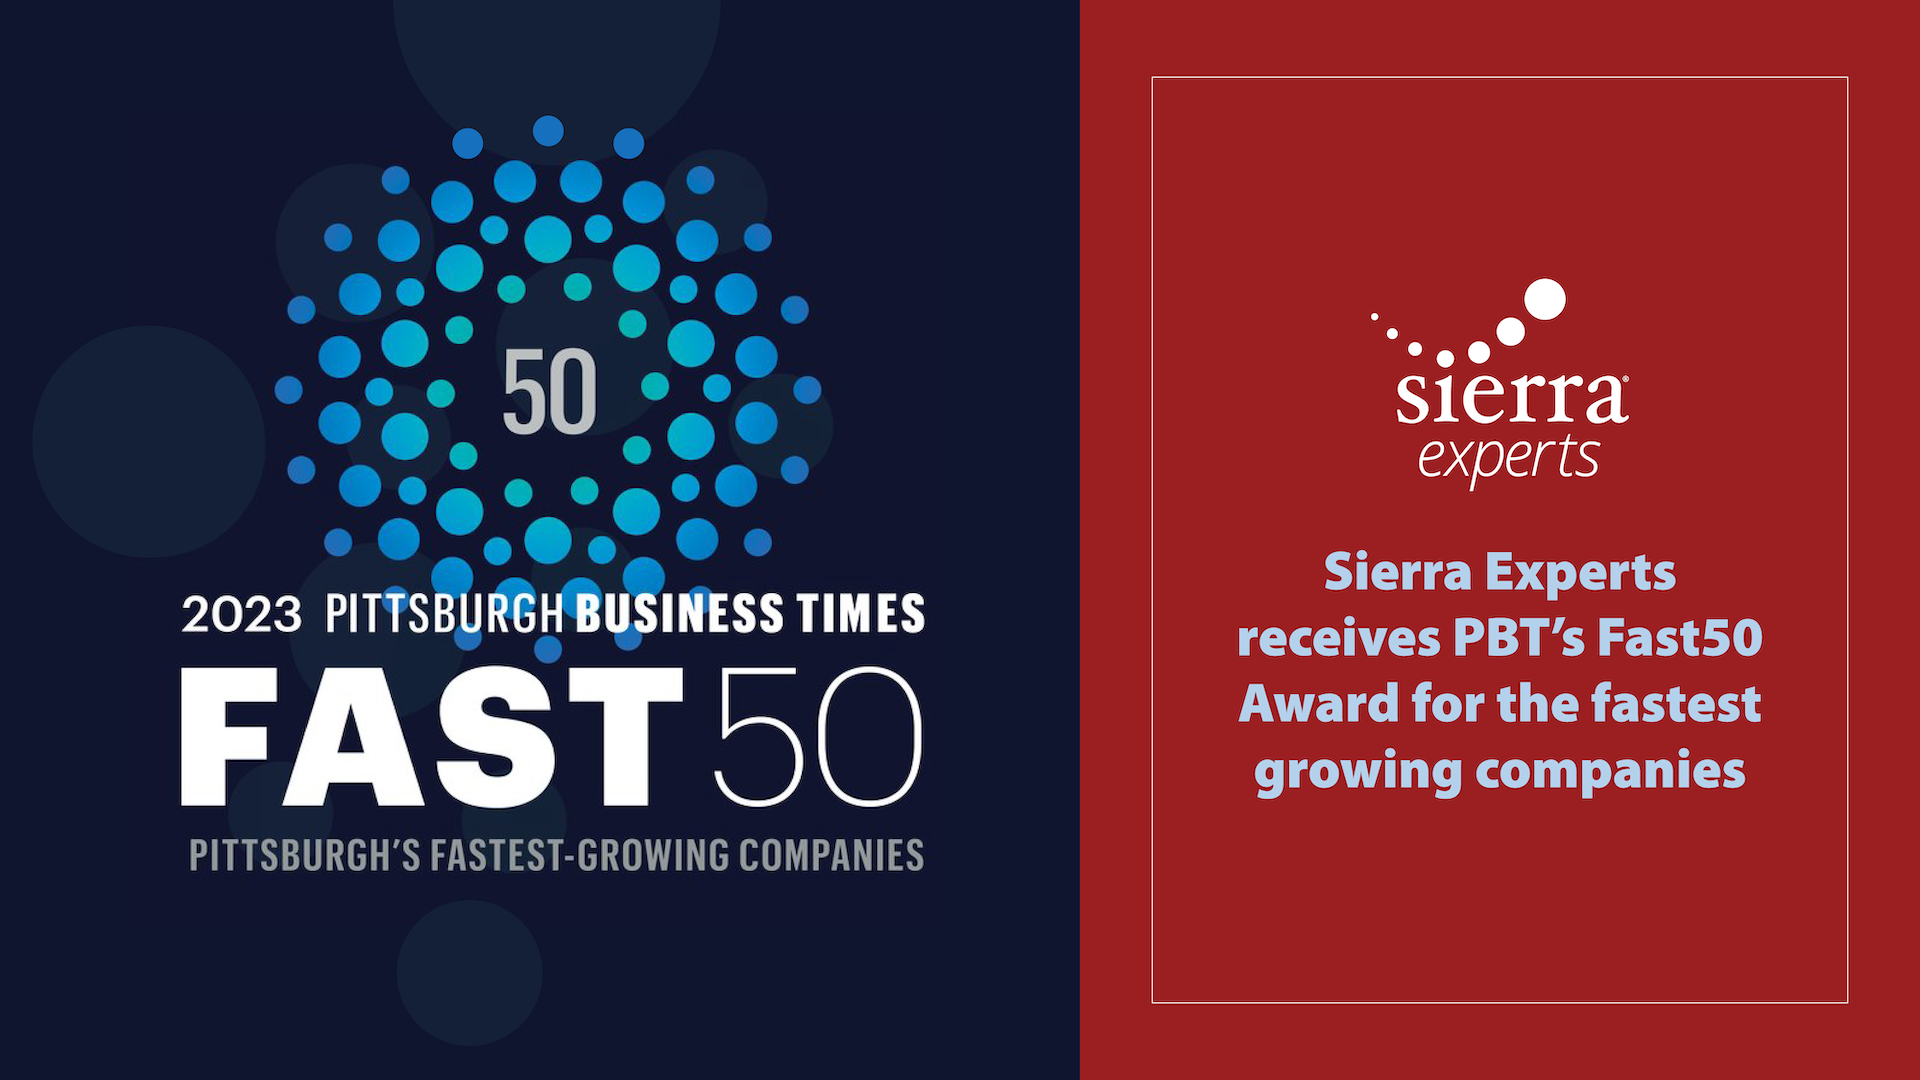 SIerra Experts is a recipient of the Fast 50 award